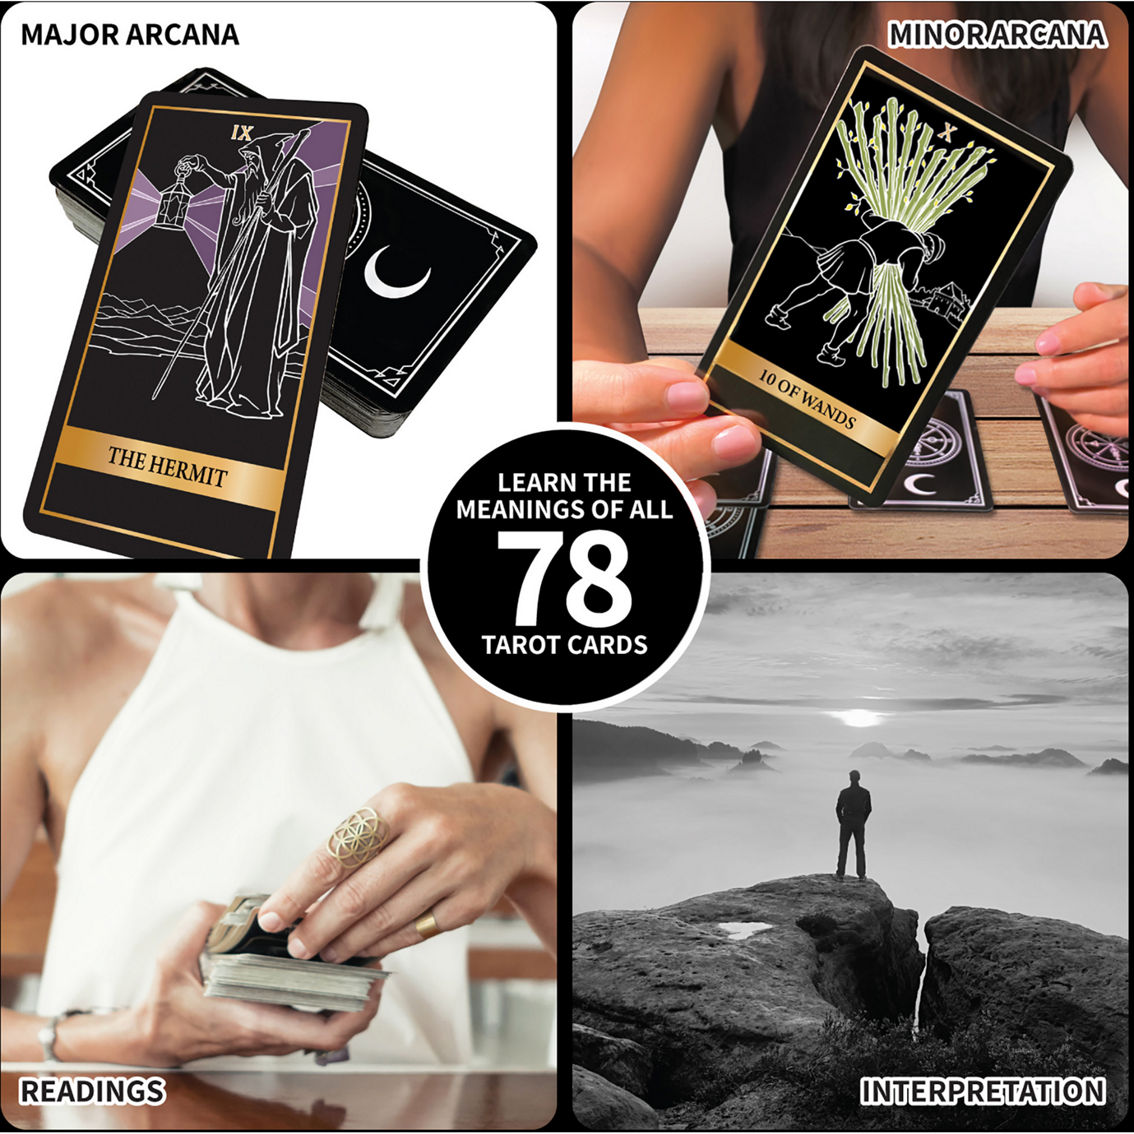 SpiceBox Gift Box: Tarot Cards - Image 4 of 7